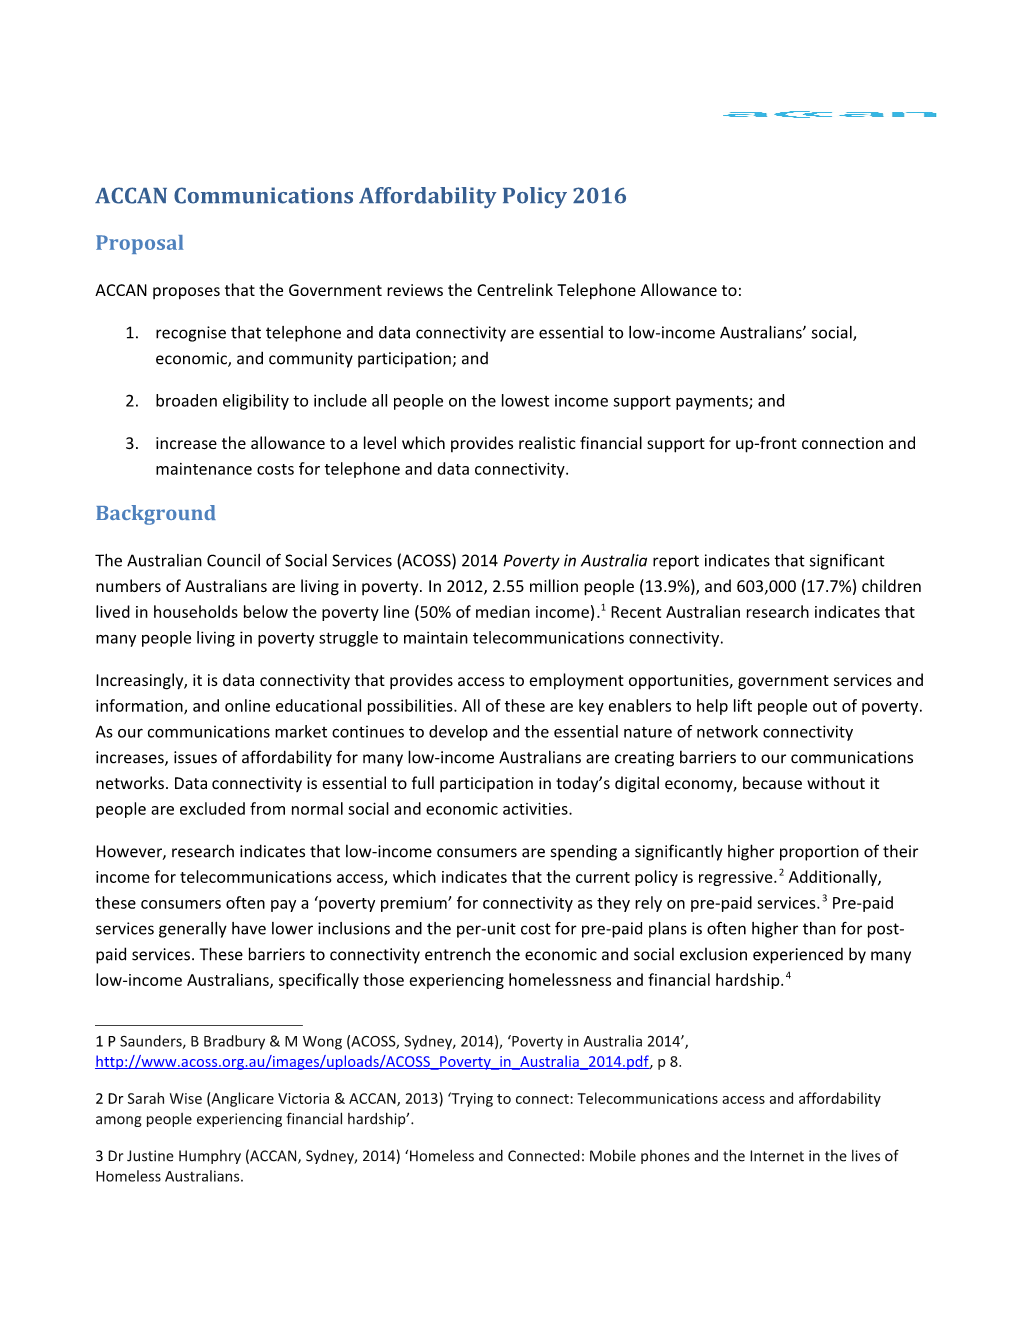 ACCAN Communications Affordability Policy 2016